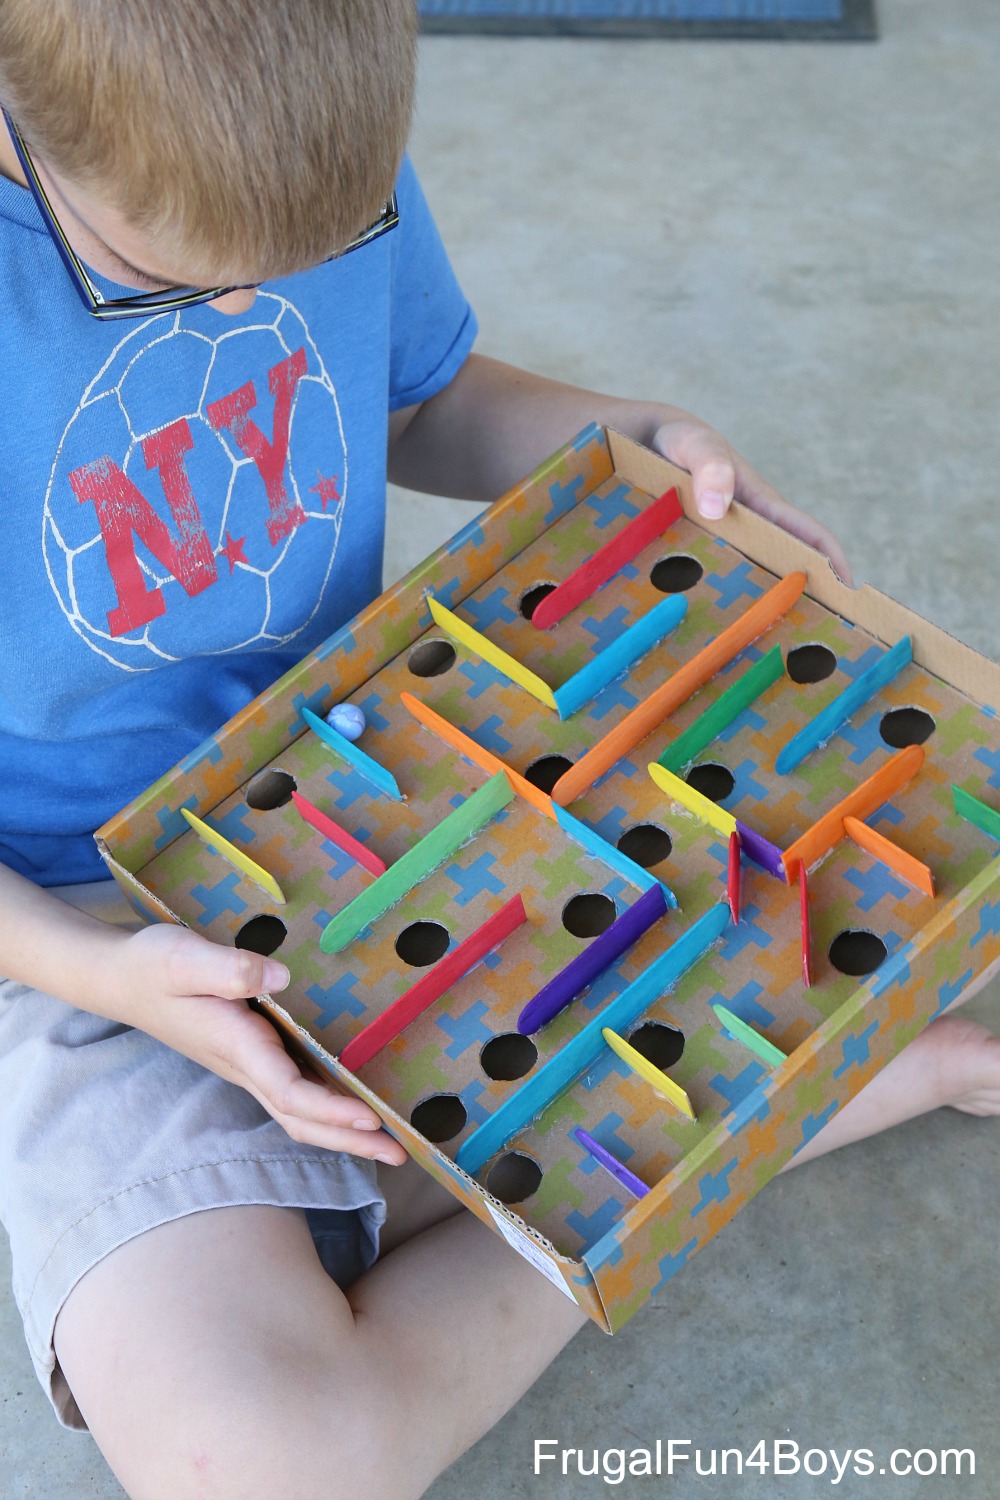 How to Make a Cardboard Box Marble Labyrinth